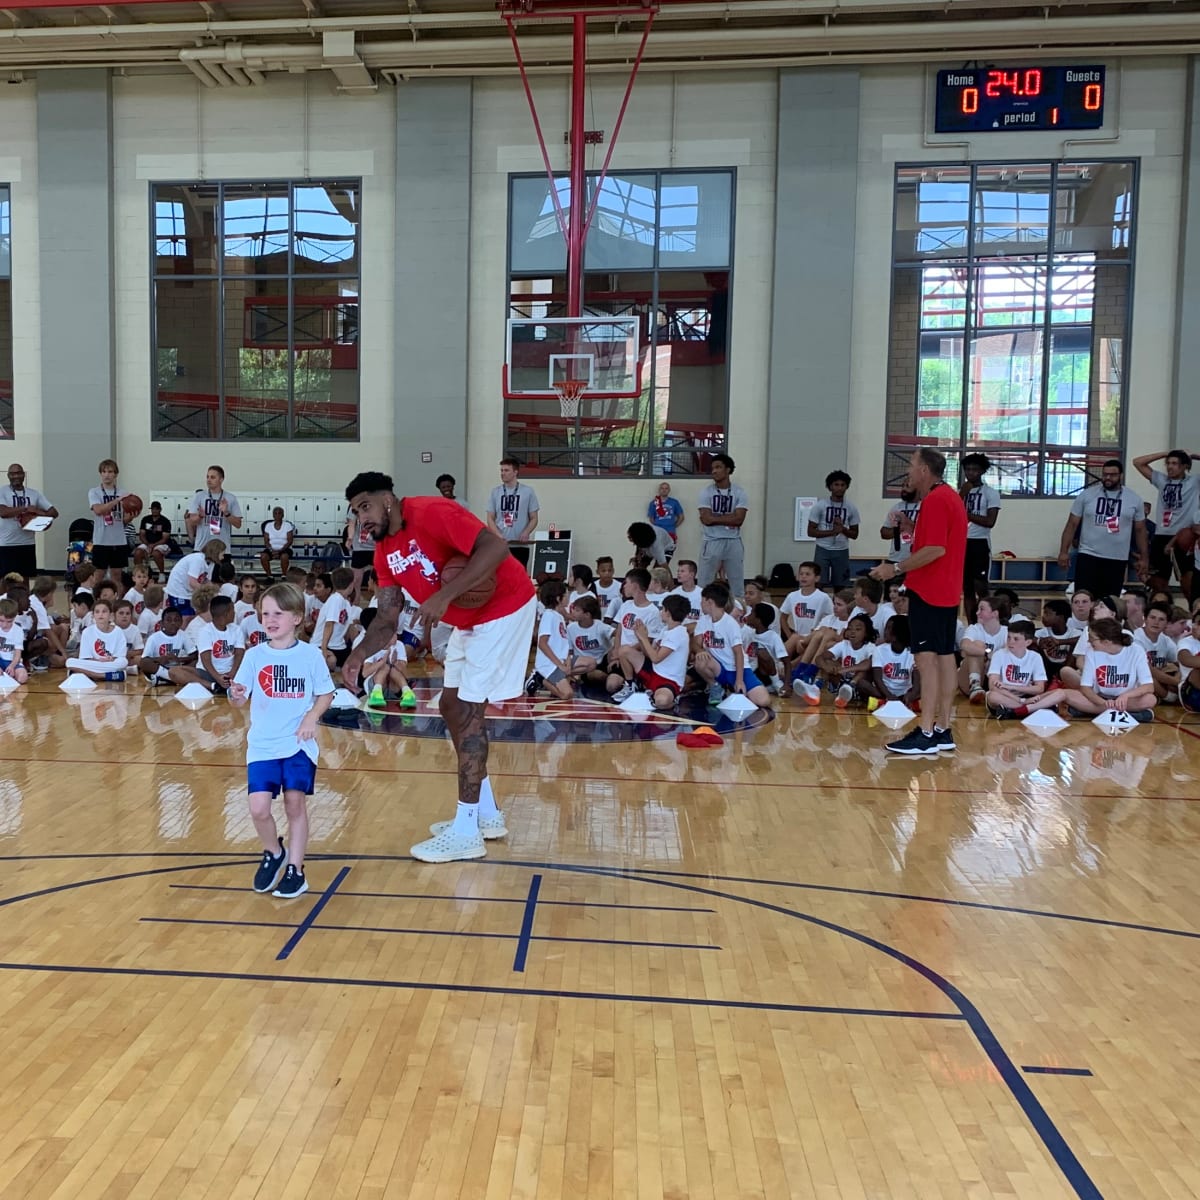 Obi Toppin to host youth basketball camp in Dayton